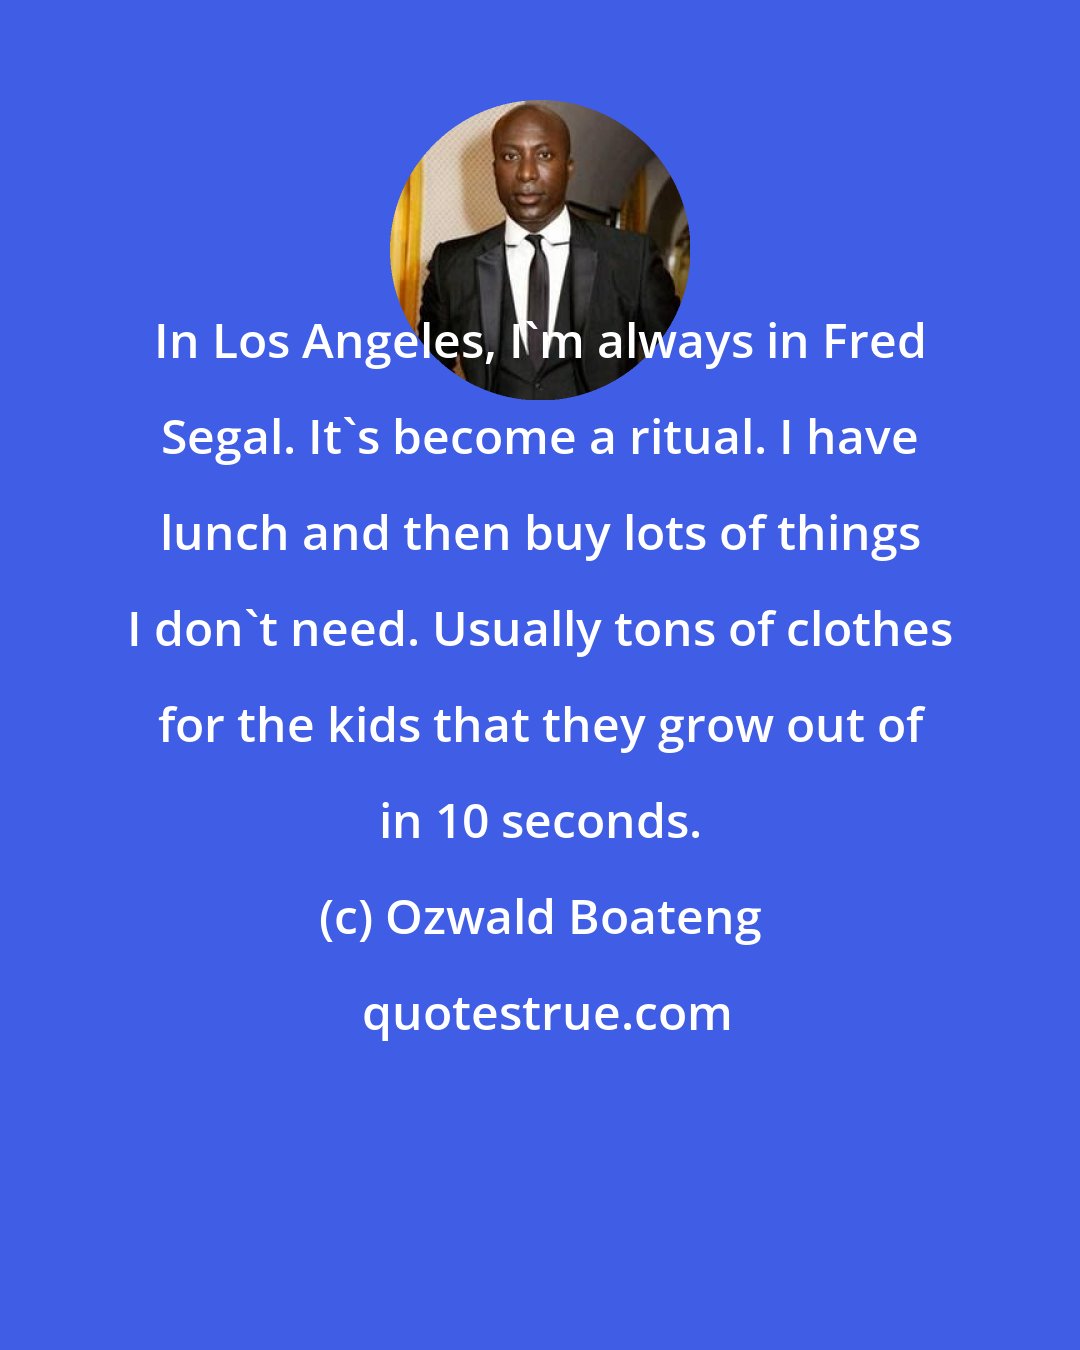 Ozwald Boateng: In Los Angeles, I'm always in Fred Segal. It's become a ritual. I have lunch and then buy lots of things I don't need. Usually tons of clothes for the kids that they grow out of in 10 seconds.